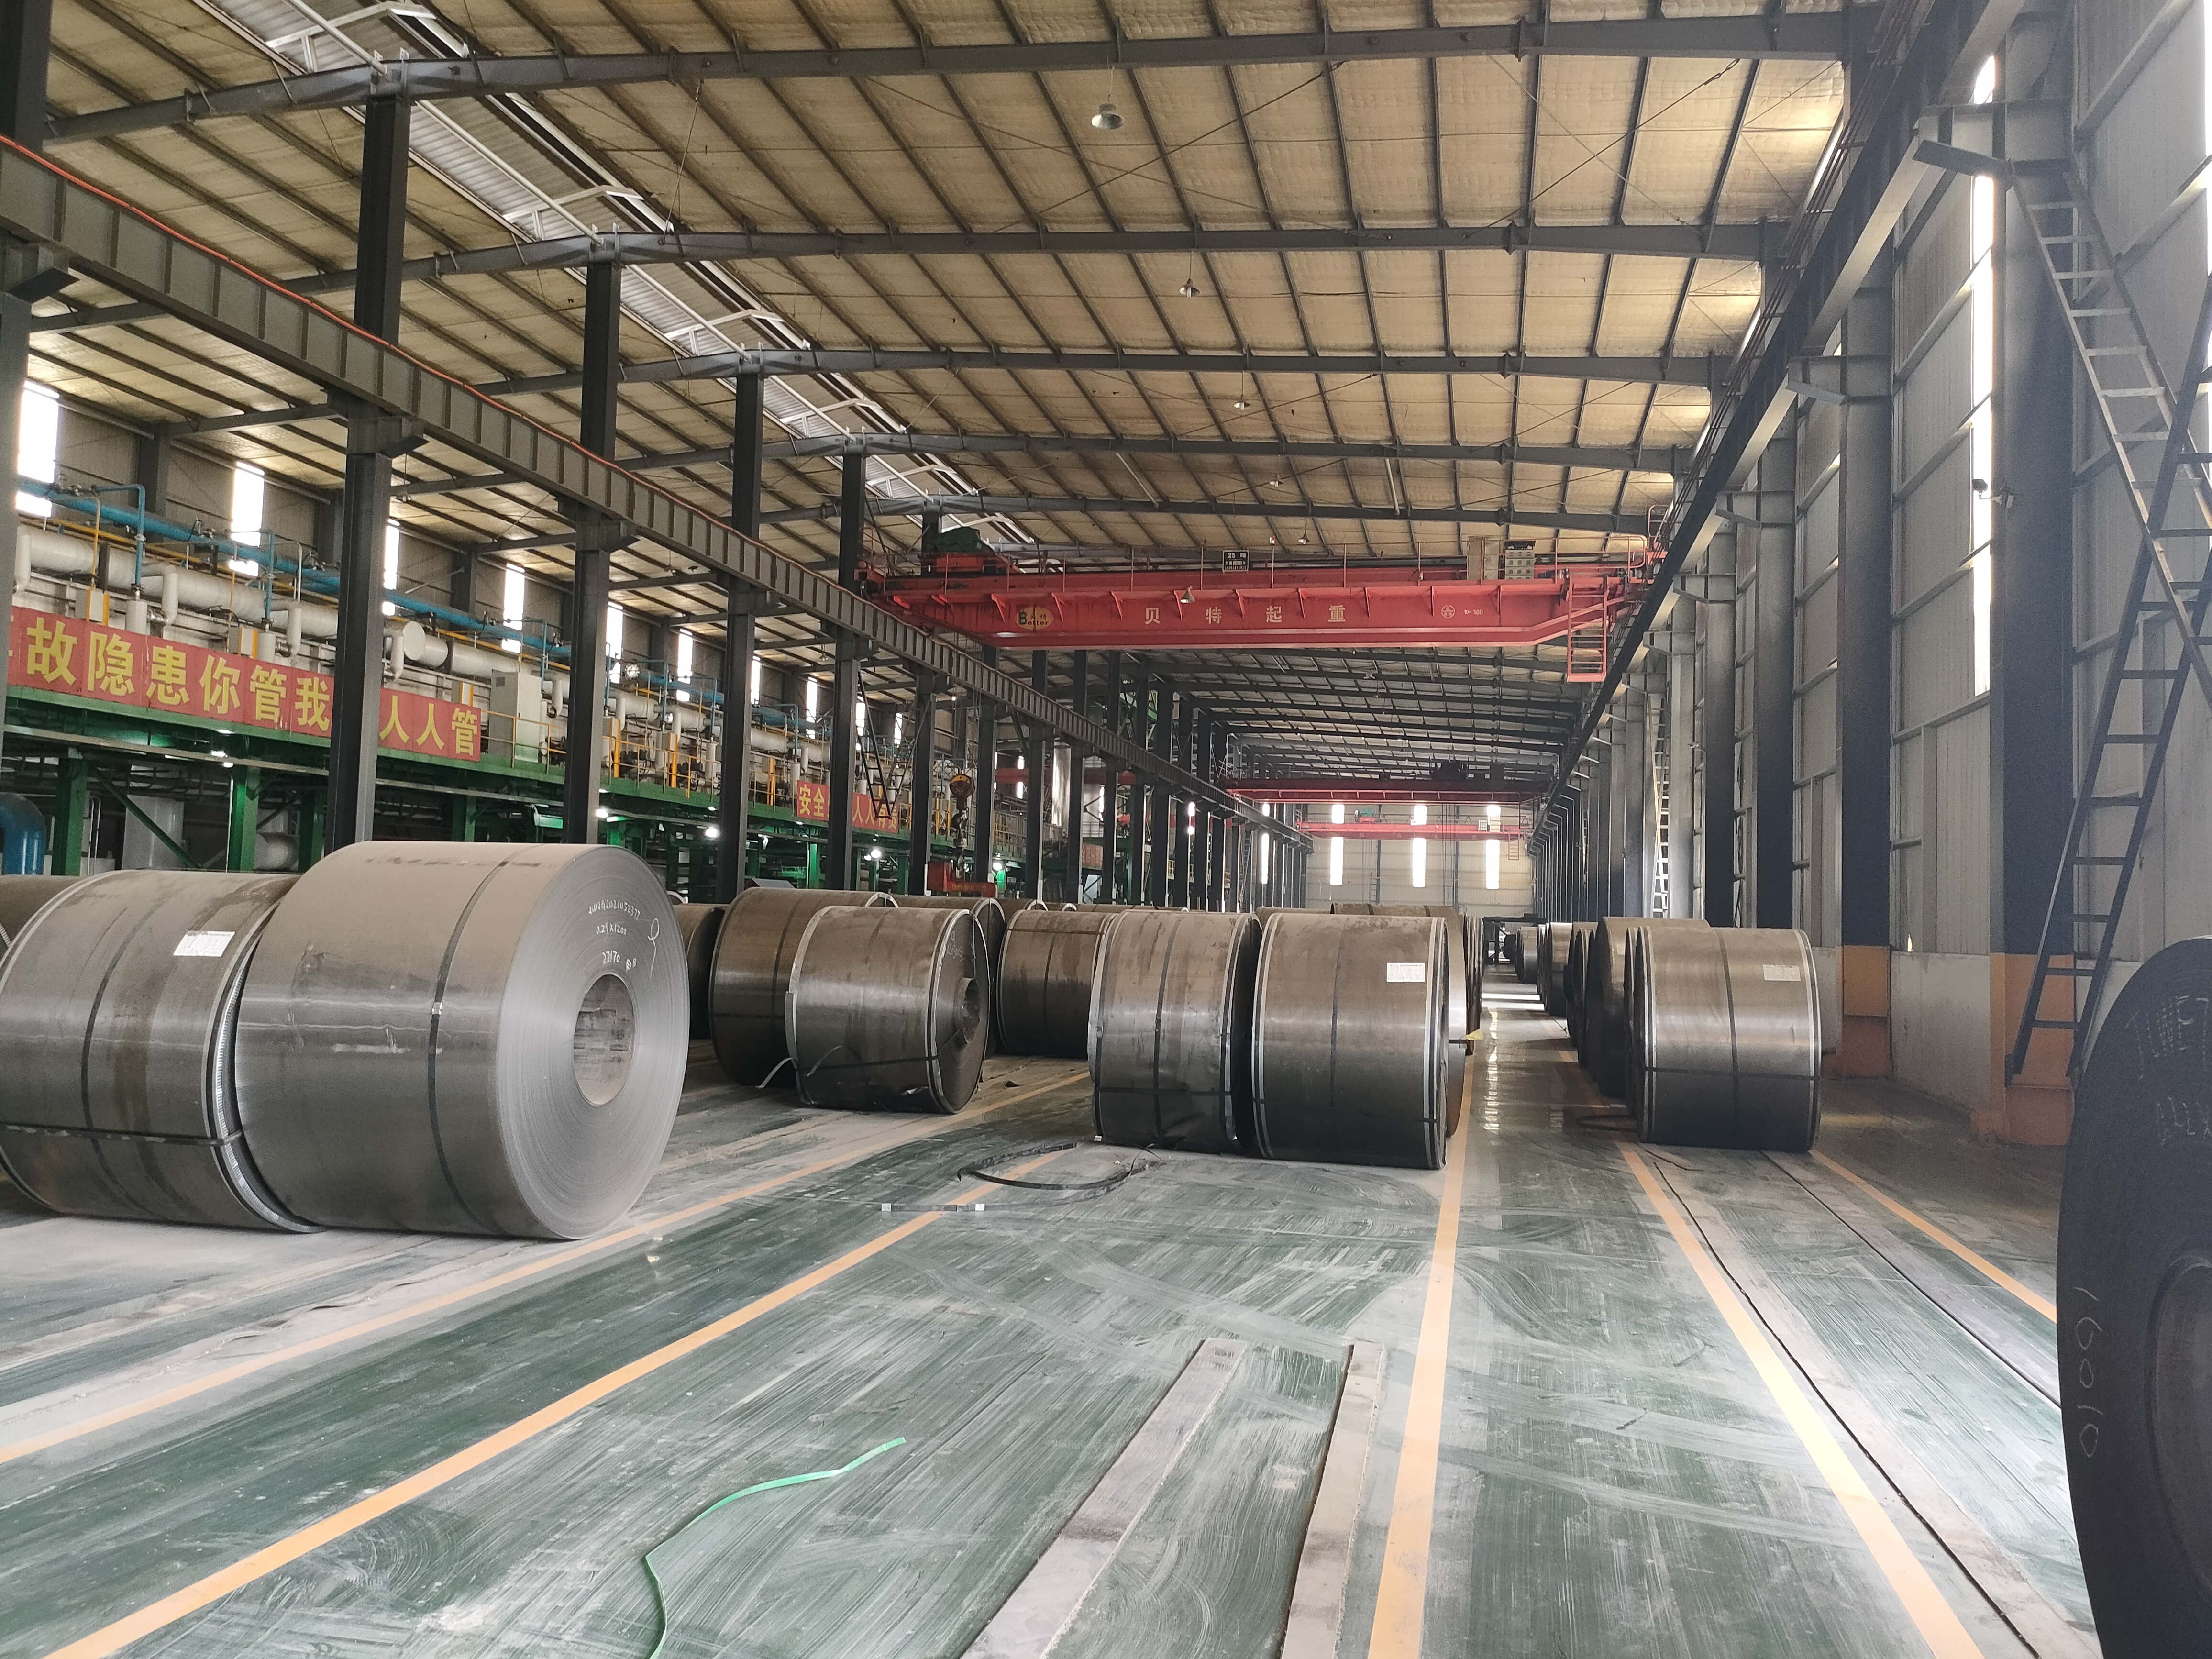 Stainless Steel Coil Stainless Steel Strip Coil 201 304 316 316L Stainless Steel Coil Manufacturer discount price 